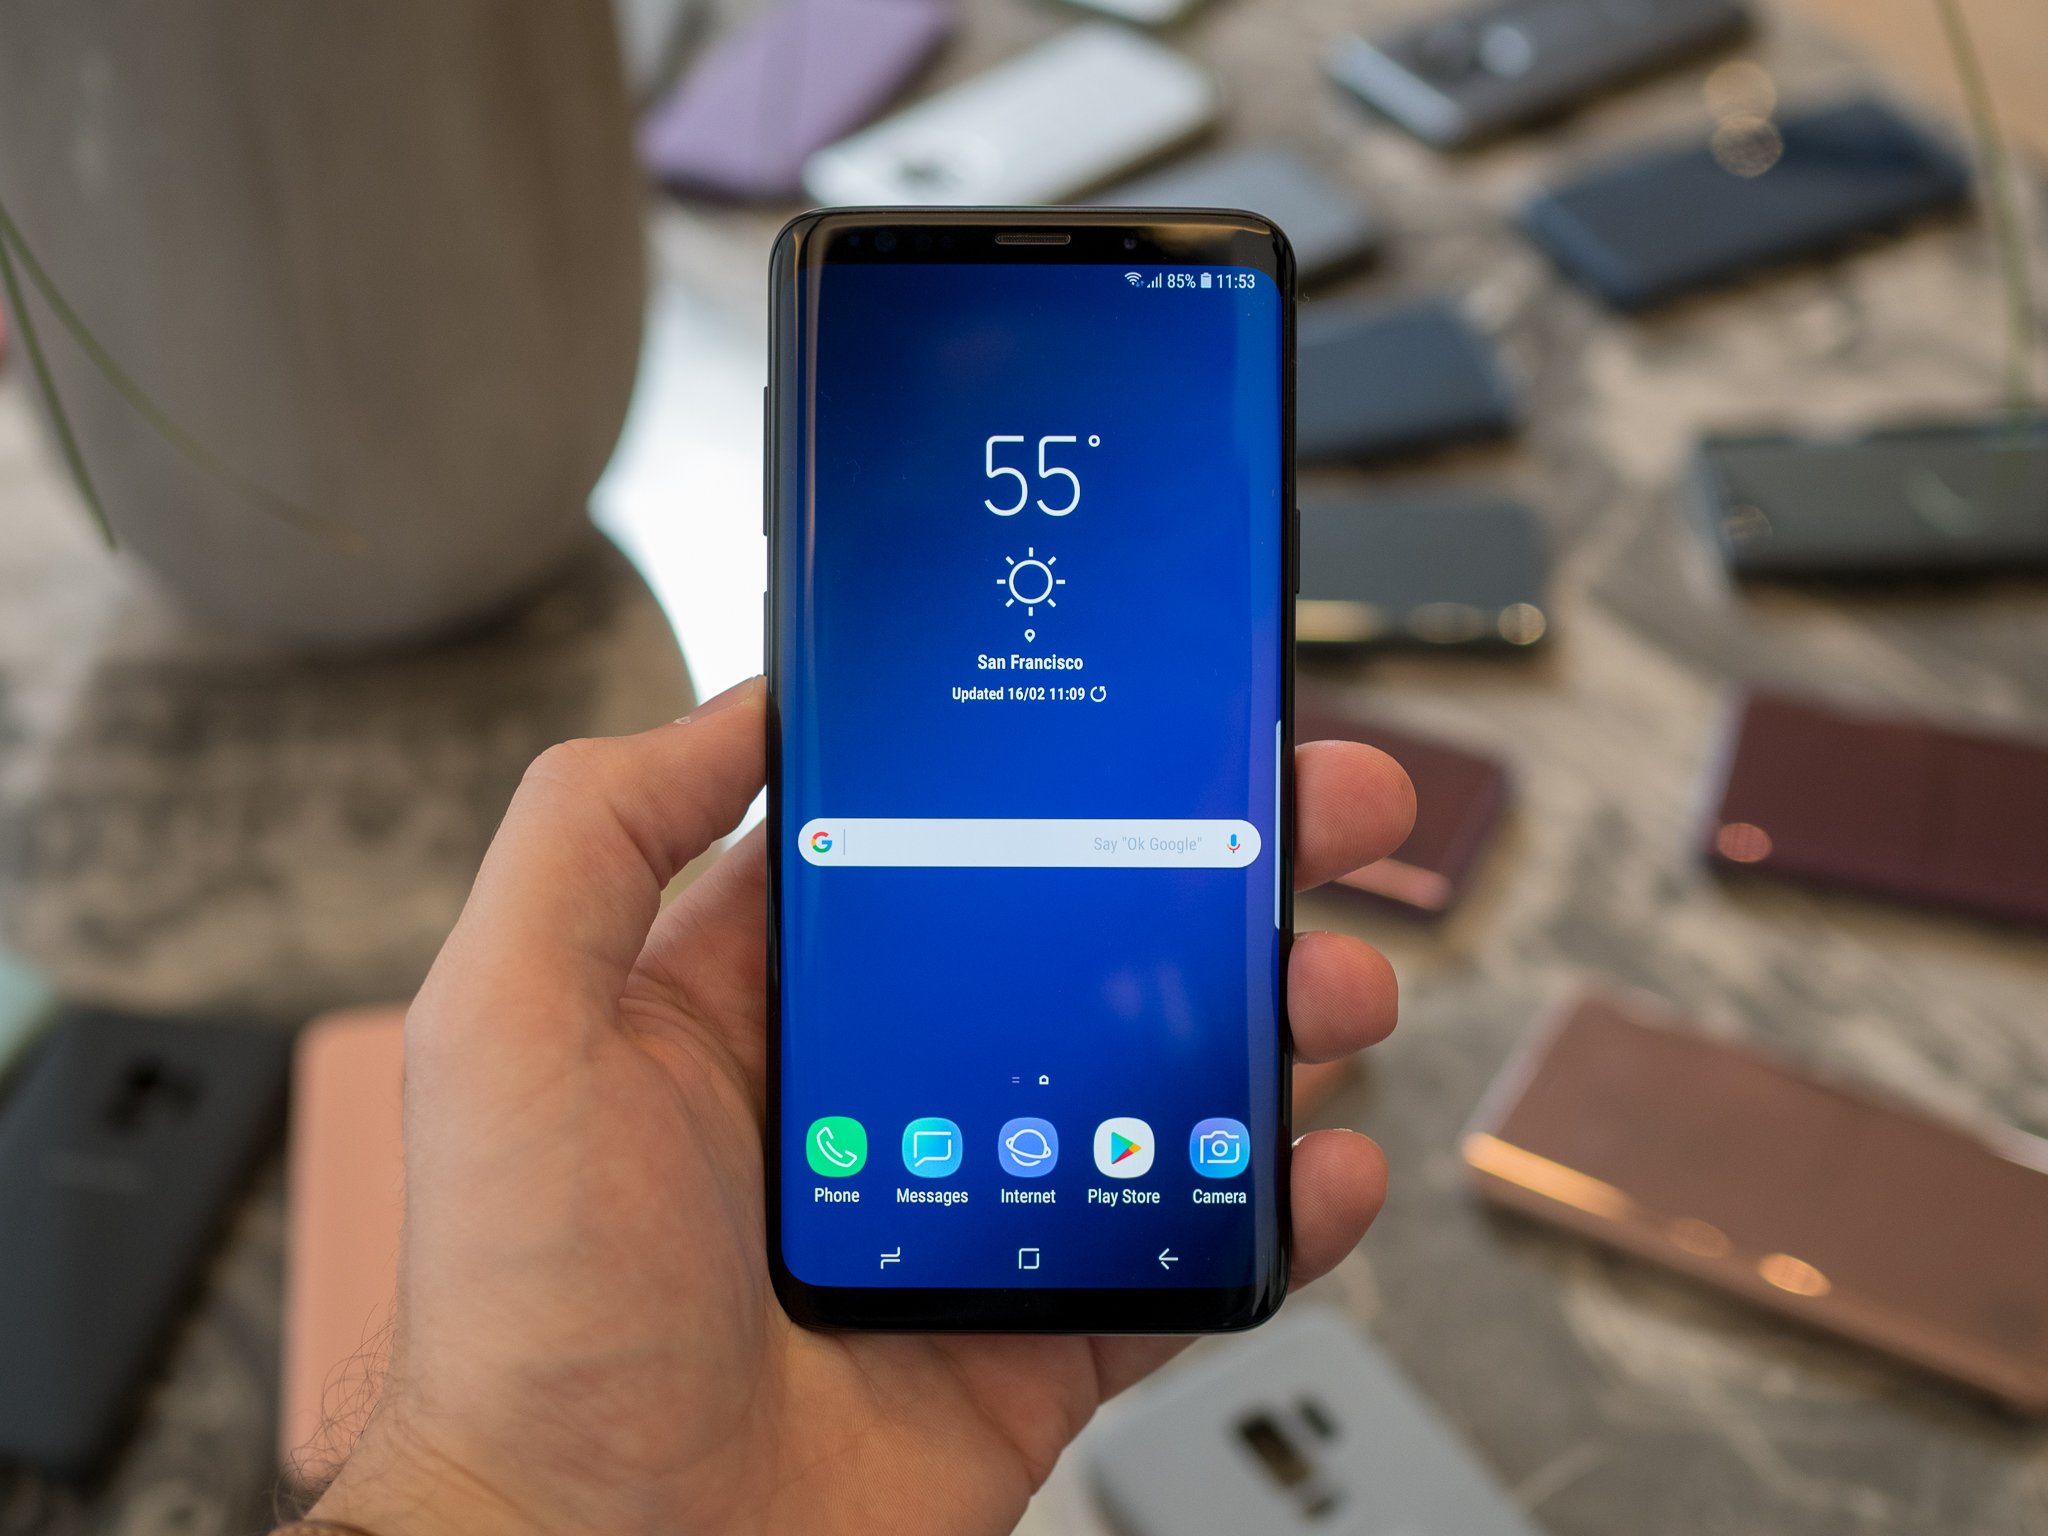 Are You Going To Use A Screen Protector On The Galaxy S9 Android